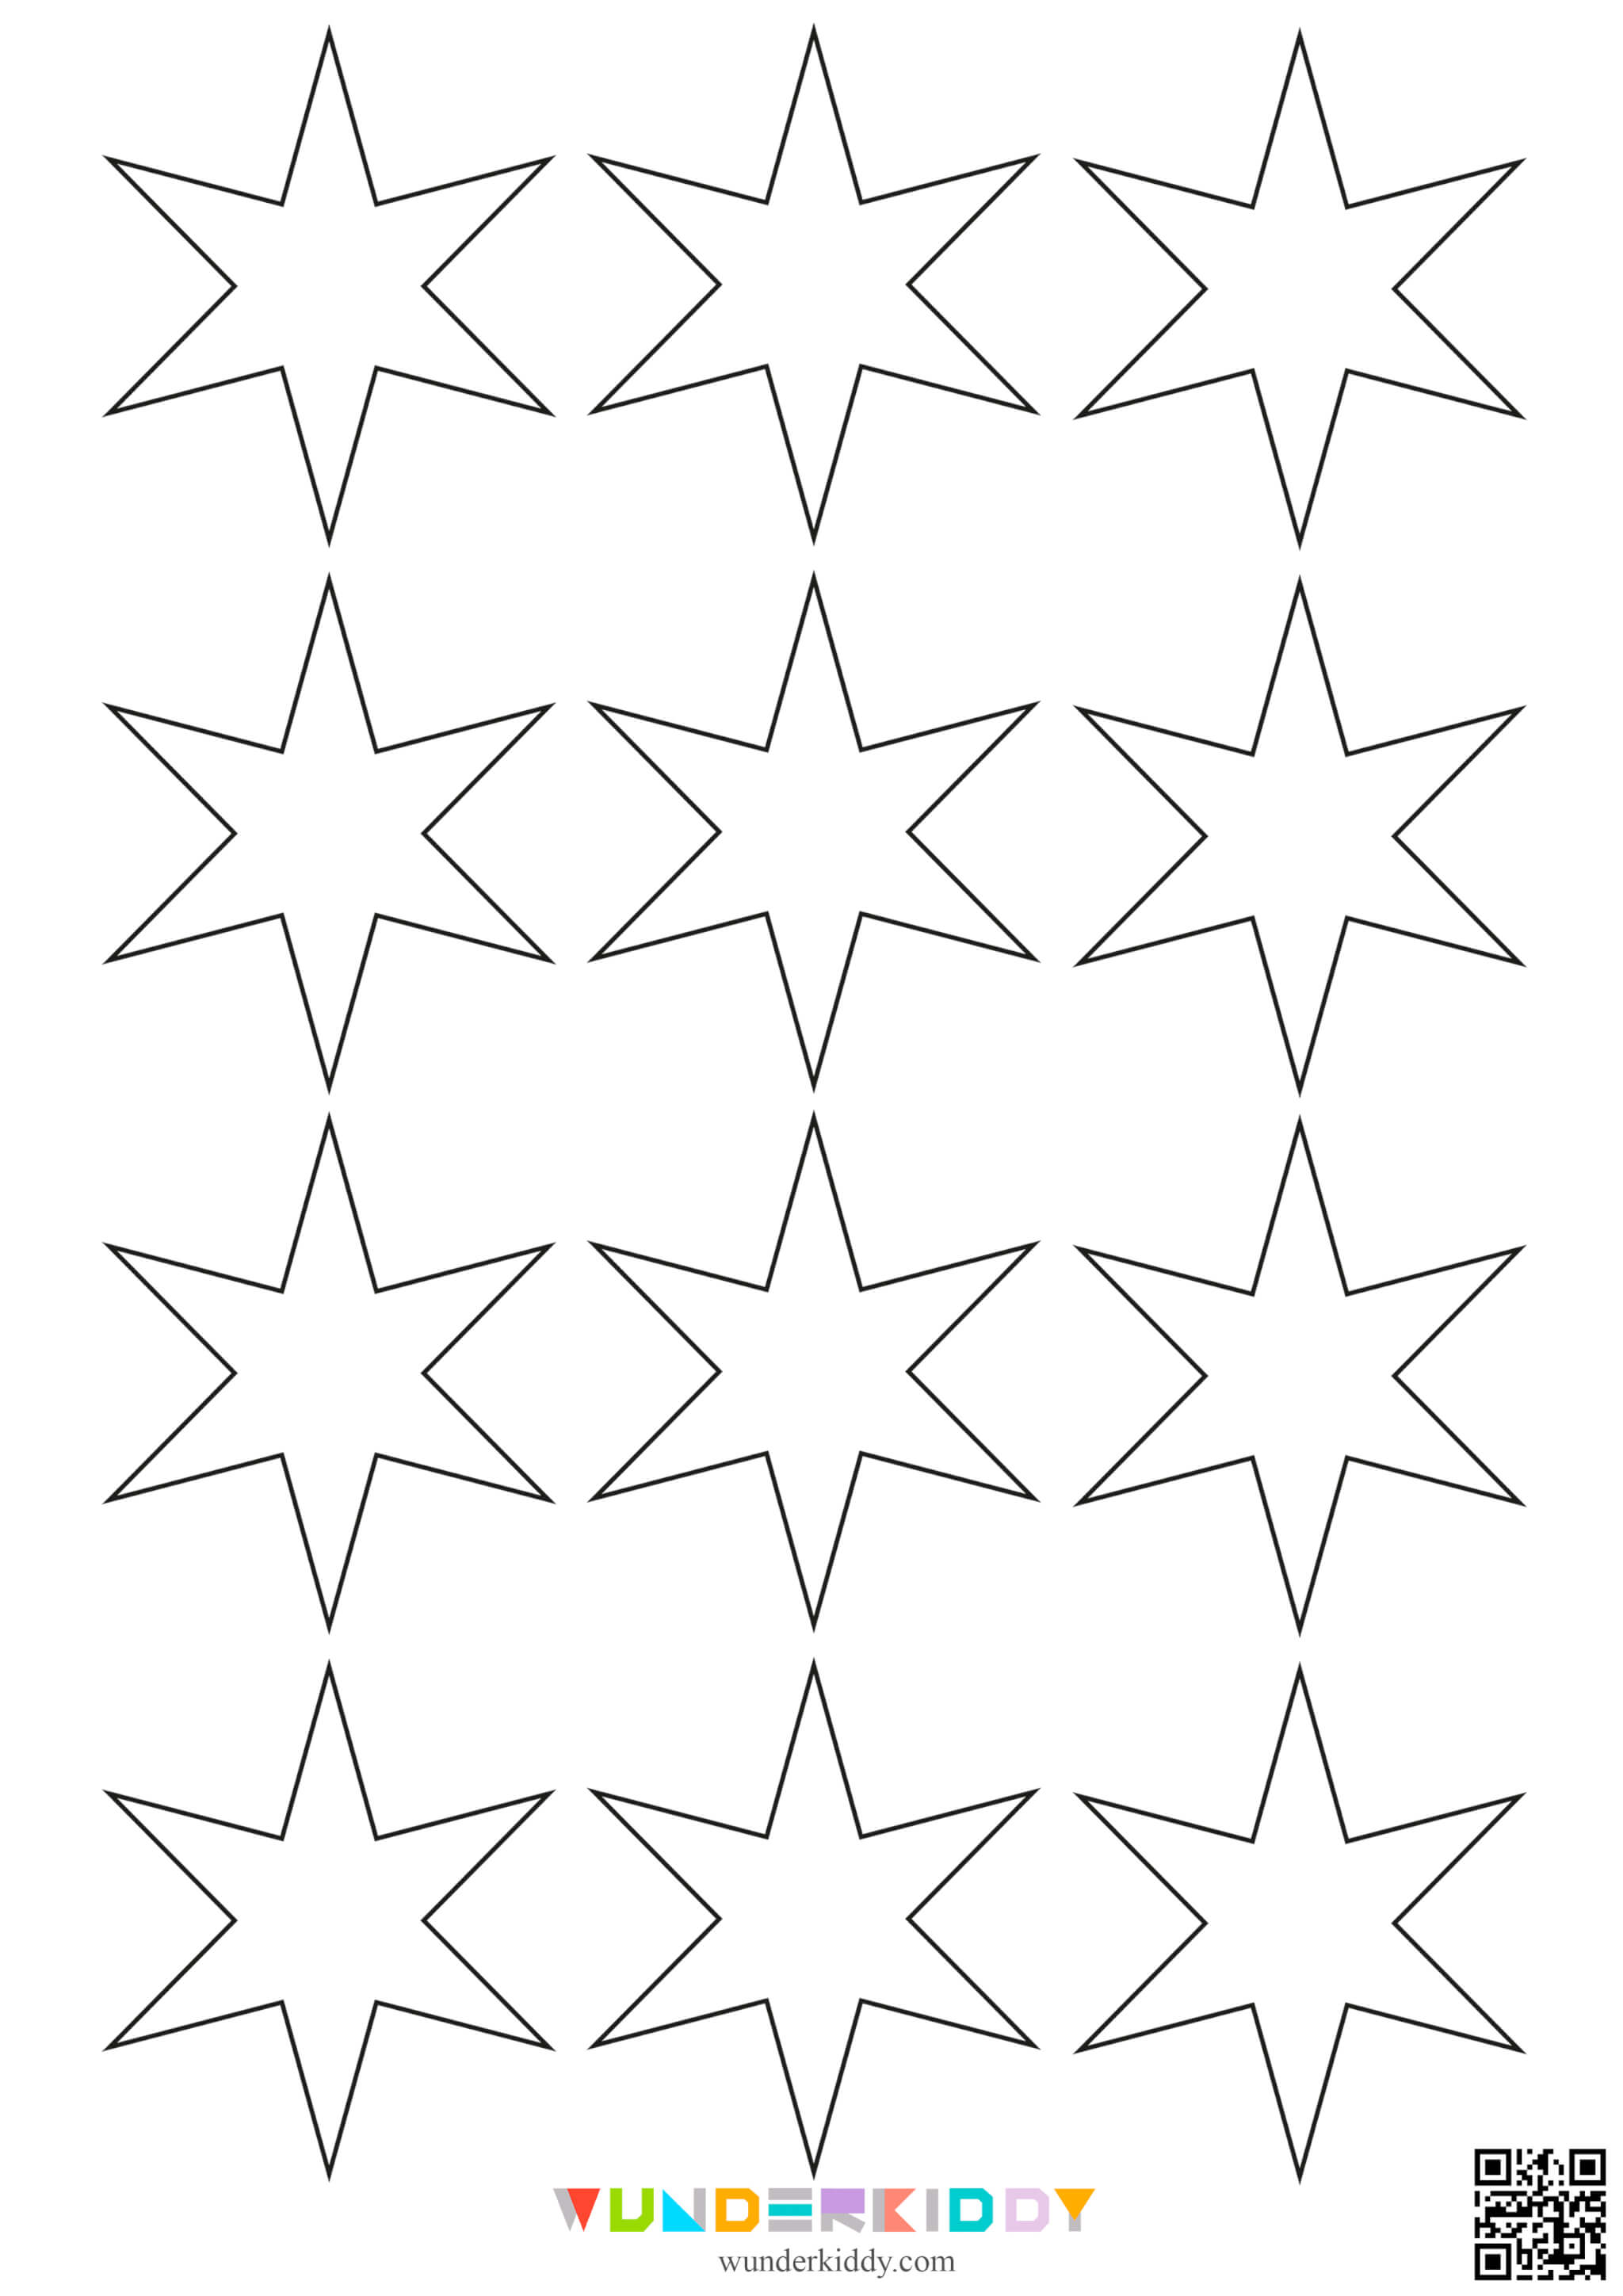 Star Outlines Templates - Image 11